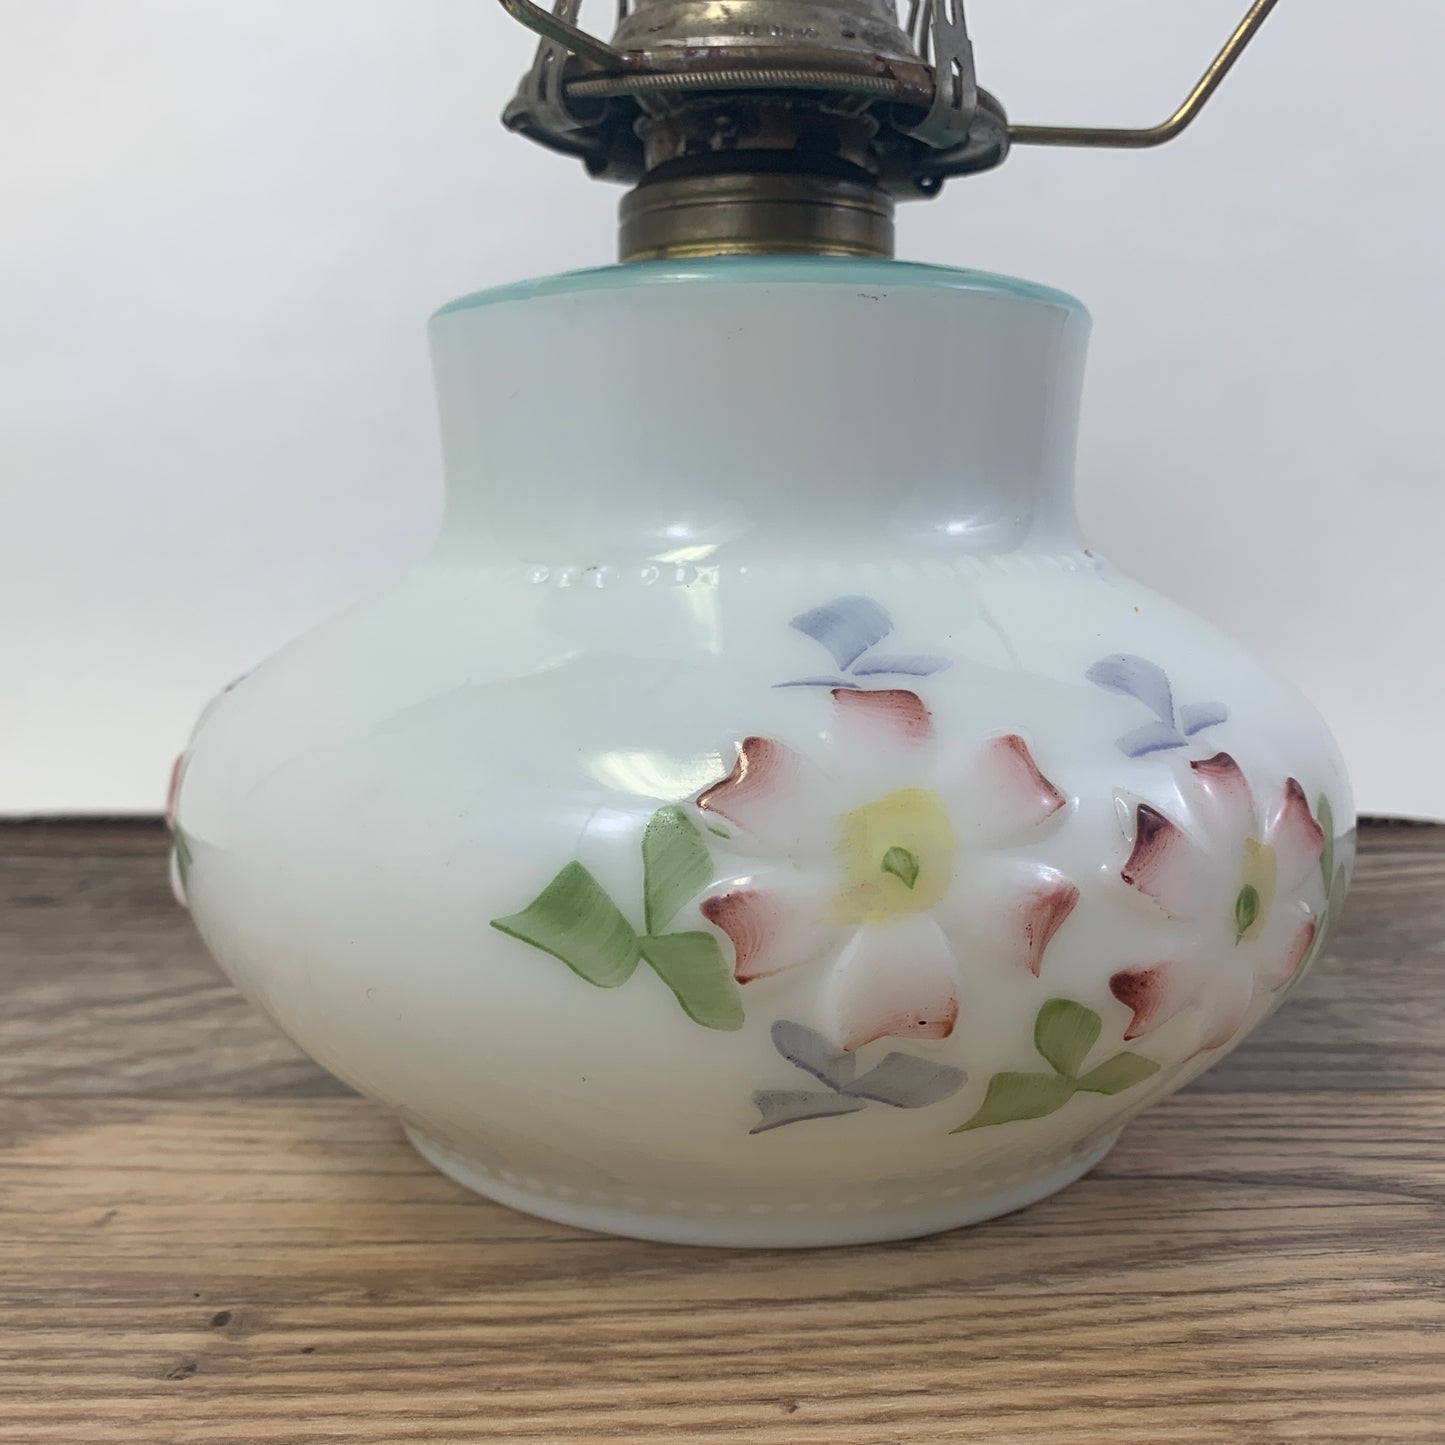 Consolidated Lamp and Glass Co EAPG Milk Glass Oil Lamp Base with Hand Painted Floral Design